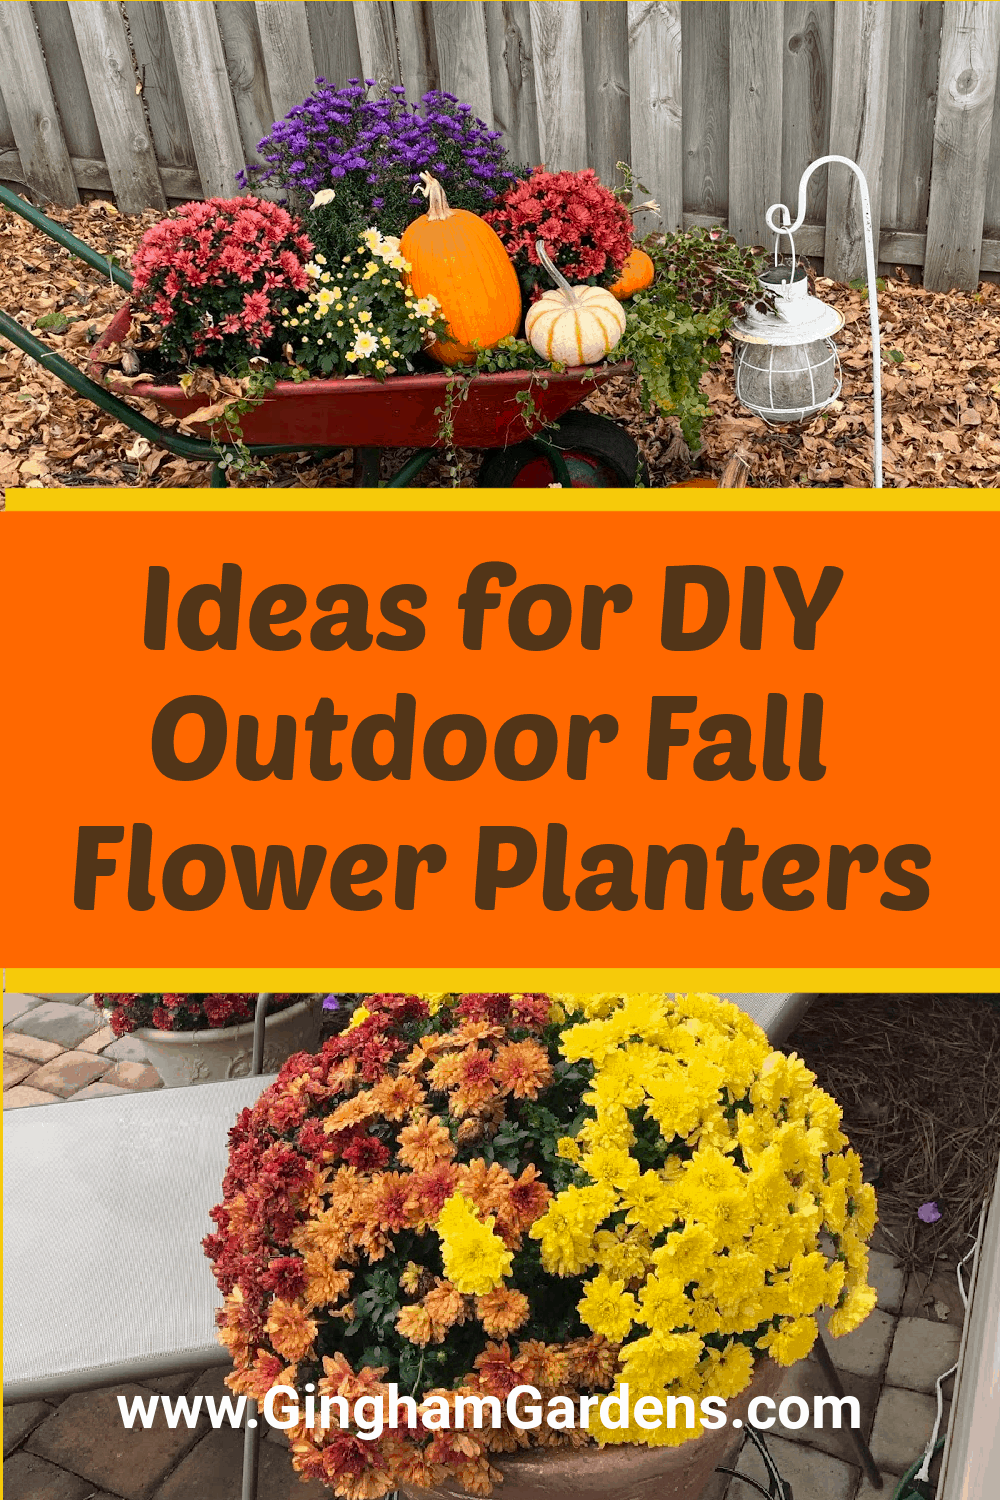 Images of fall gardens with text overlay - Ideas for DIY Outdoor Fall Flower Planters